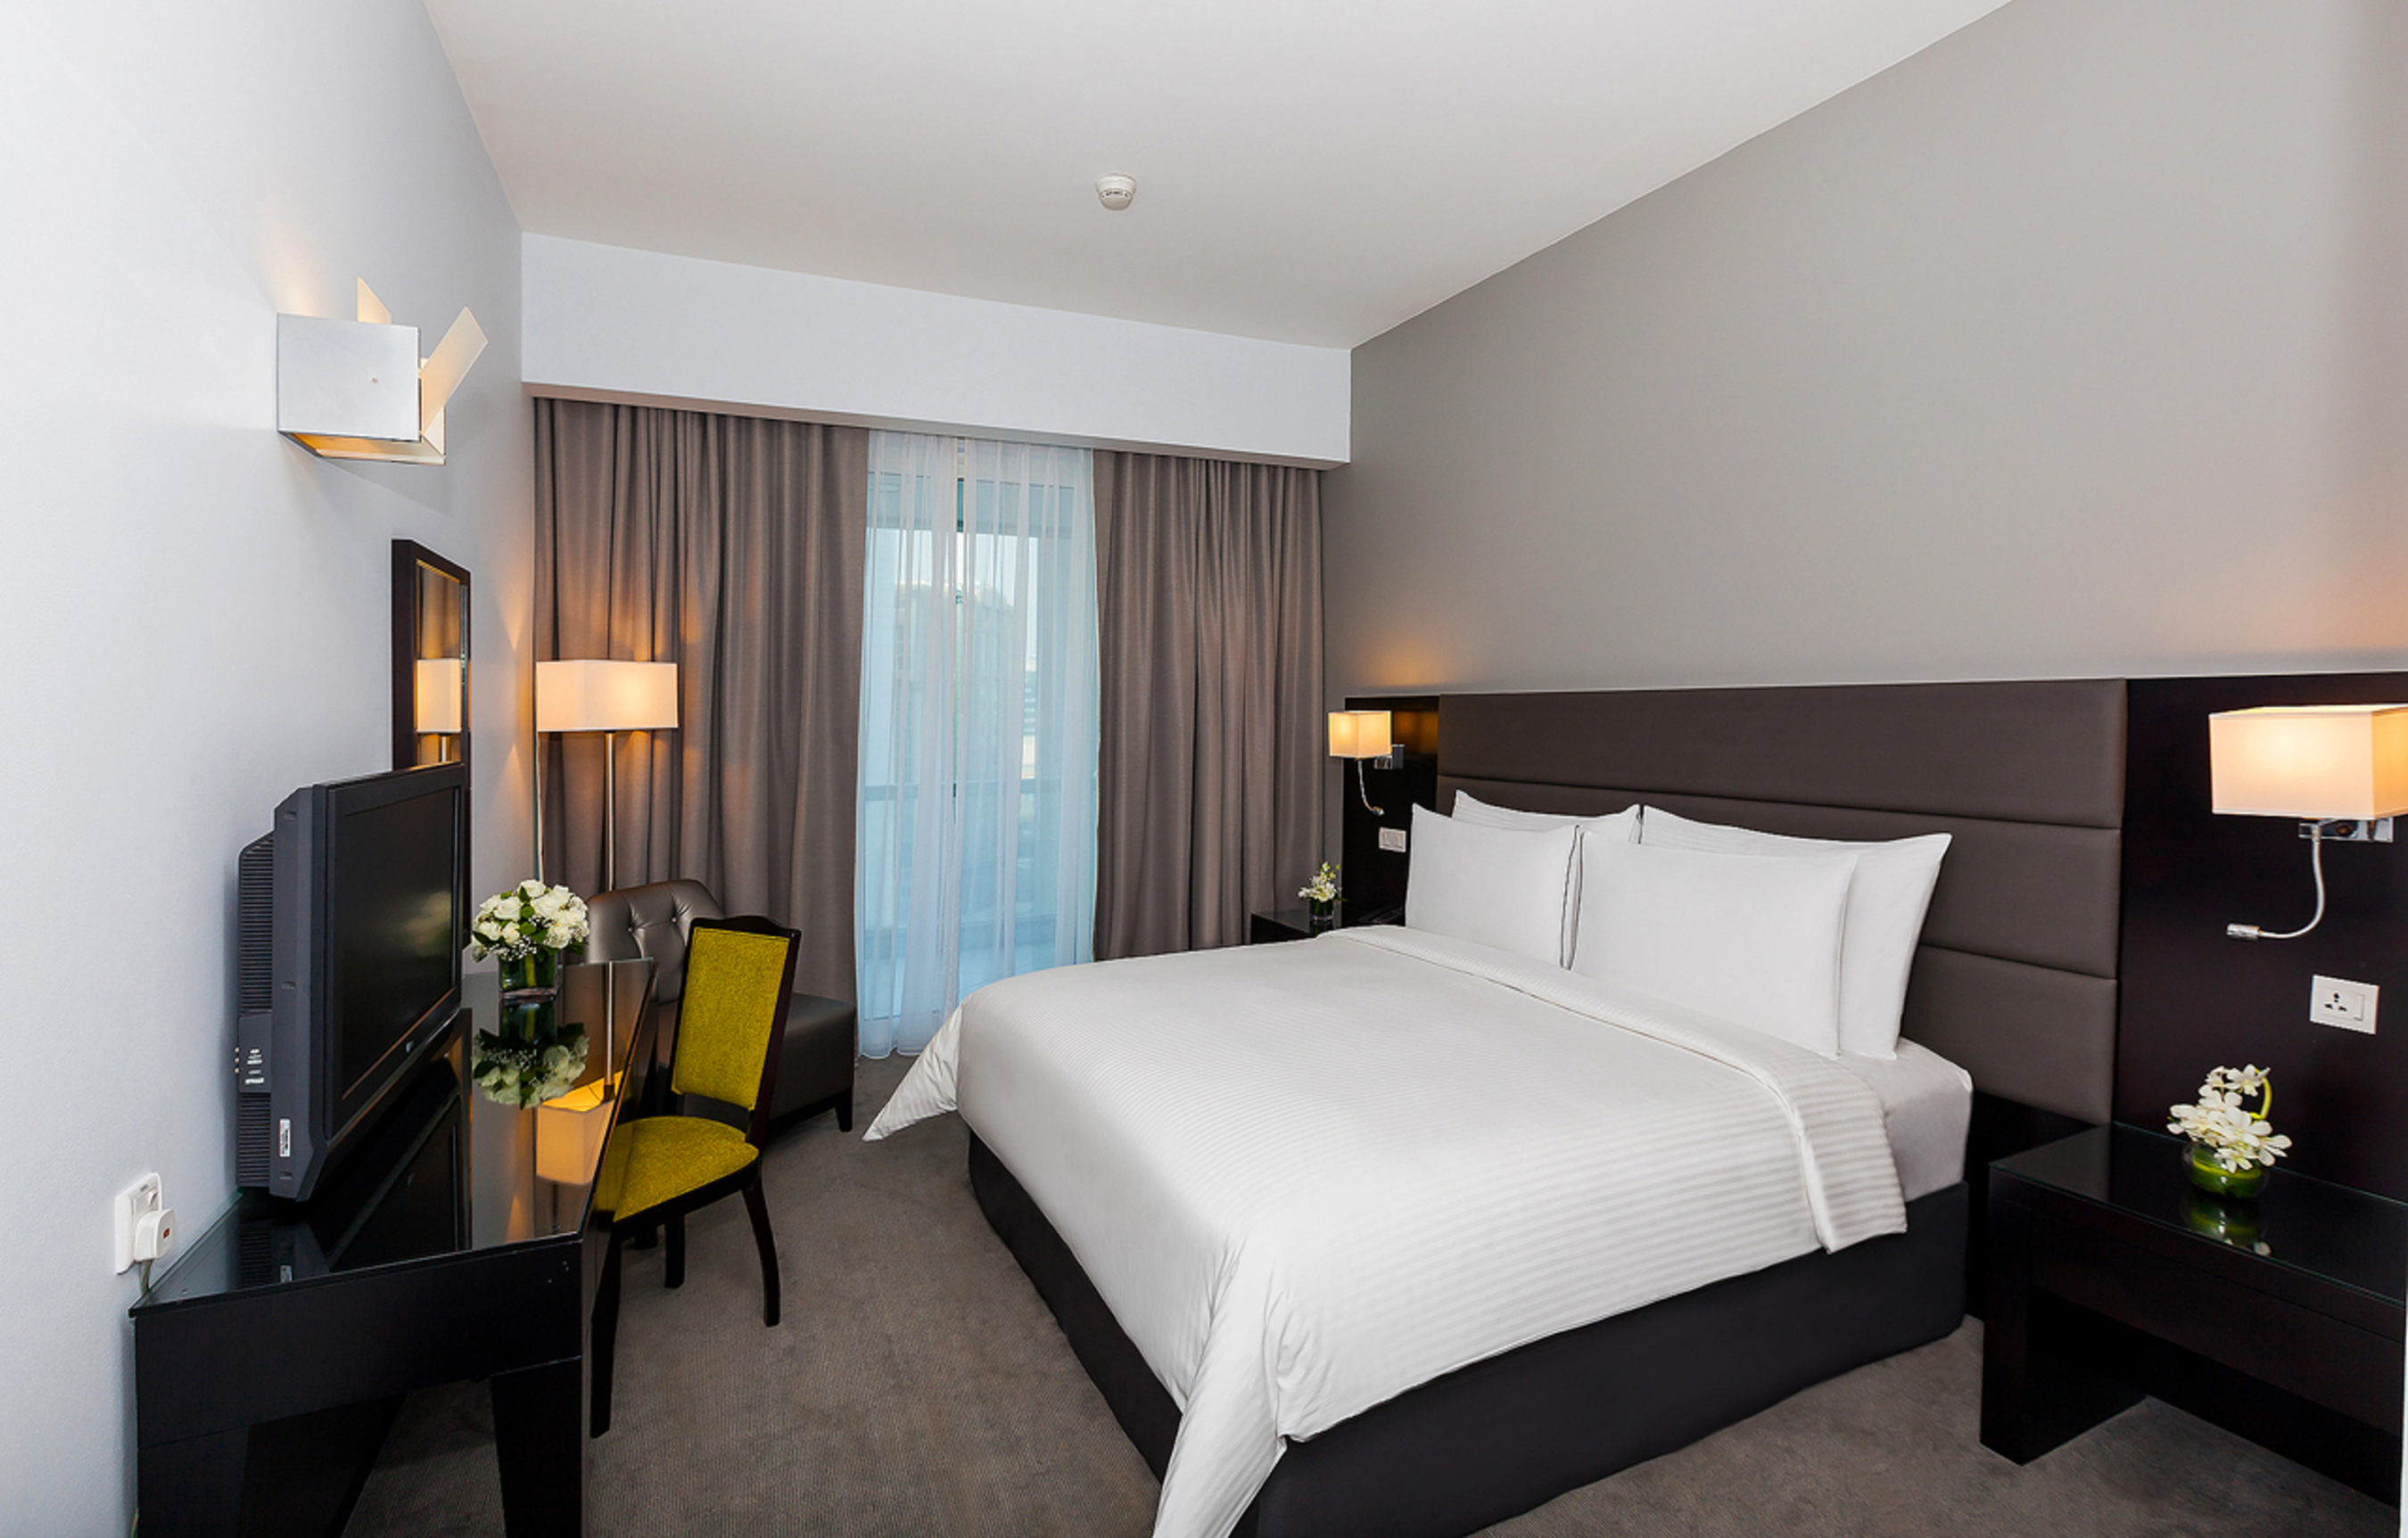 Newly redesigned rooms at Flora Creek Deluxe Hotel Apartments. (PRNewsFoto/Flora Hospitality)